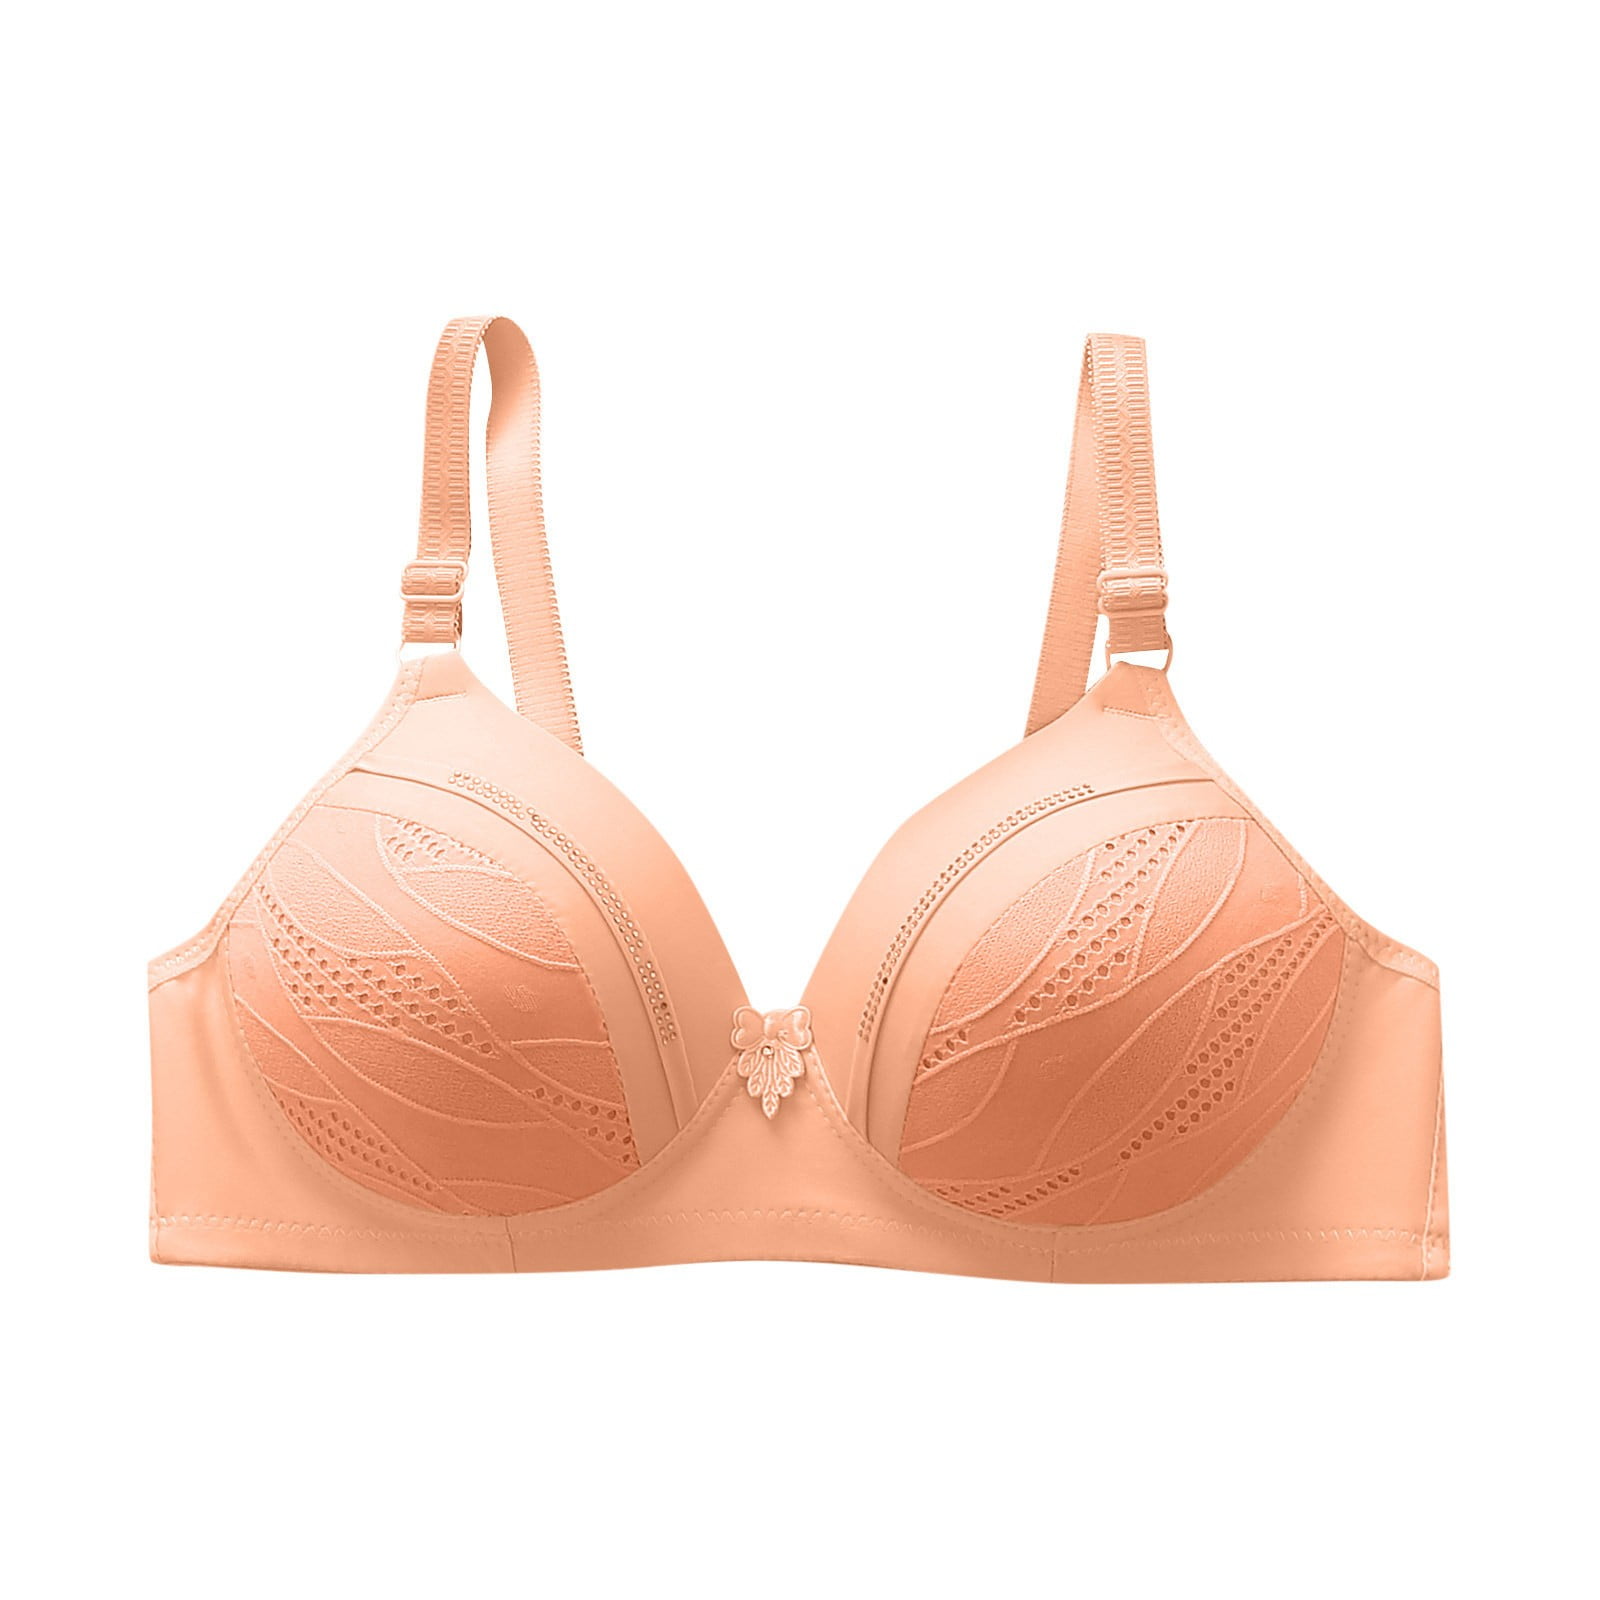 Bigersell Wireless Bras with Support and Lift Sale Balconette Bras